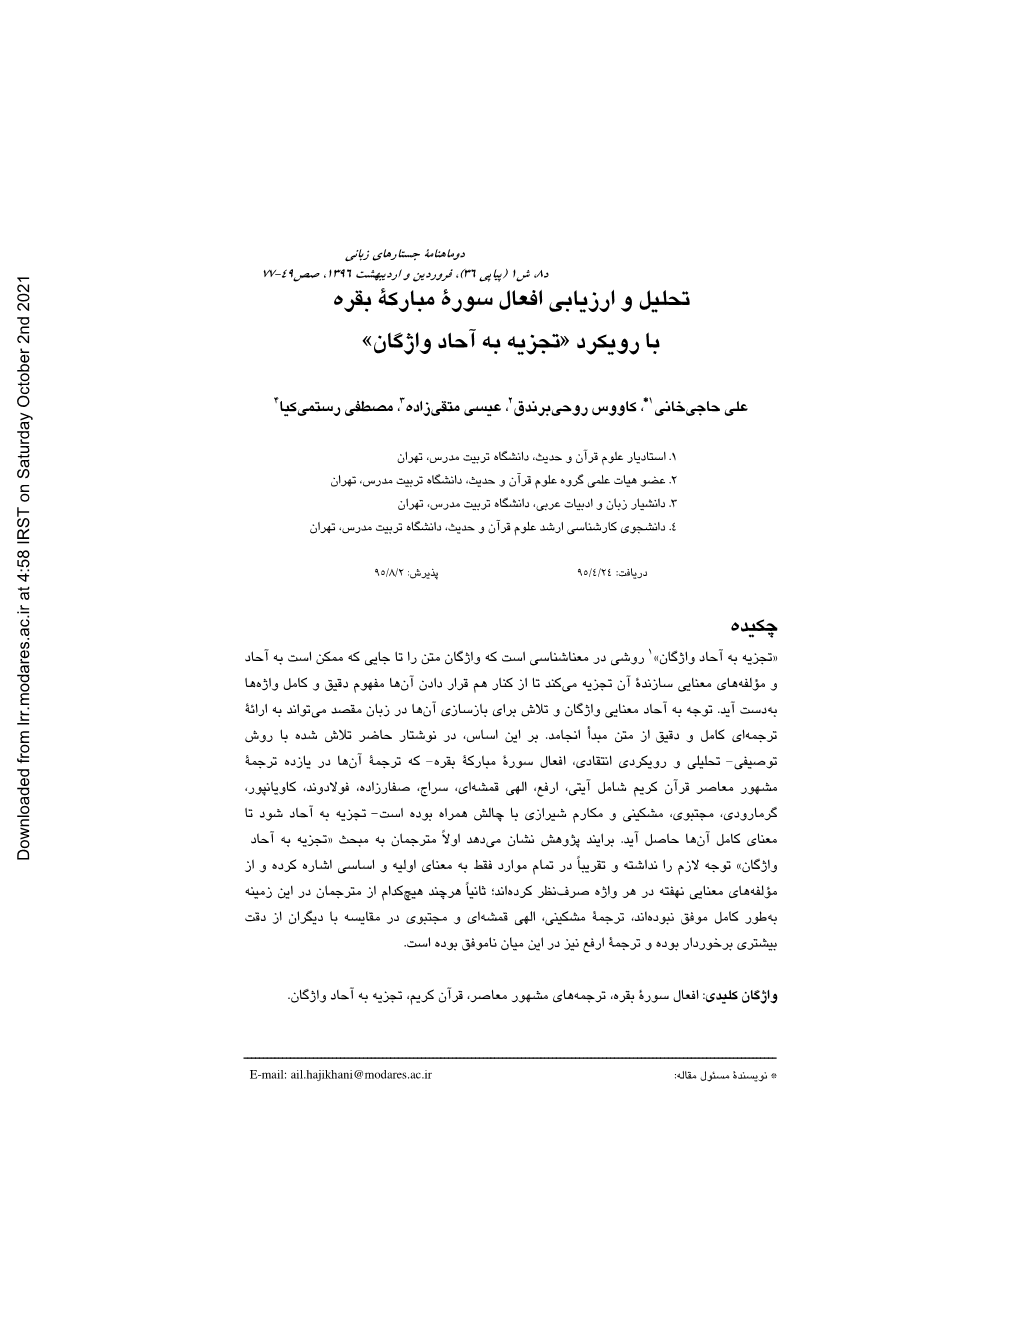 Analyze and Evaluate the Actions of Sura Al-Baqara, with Approach